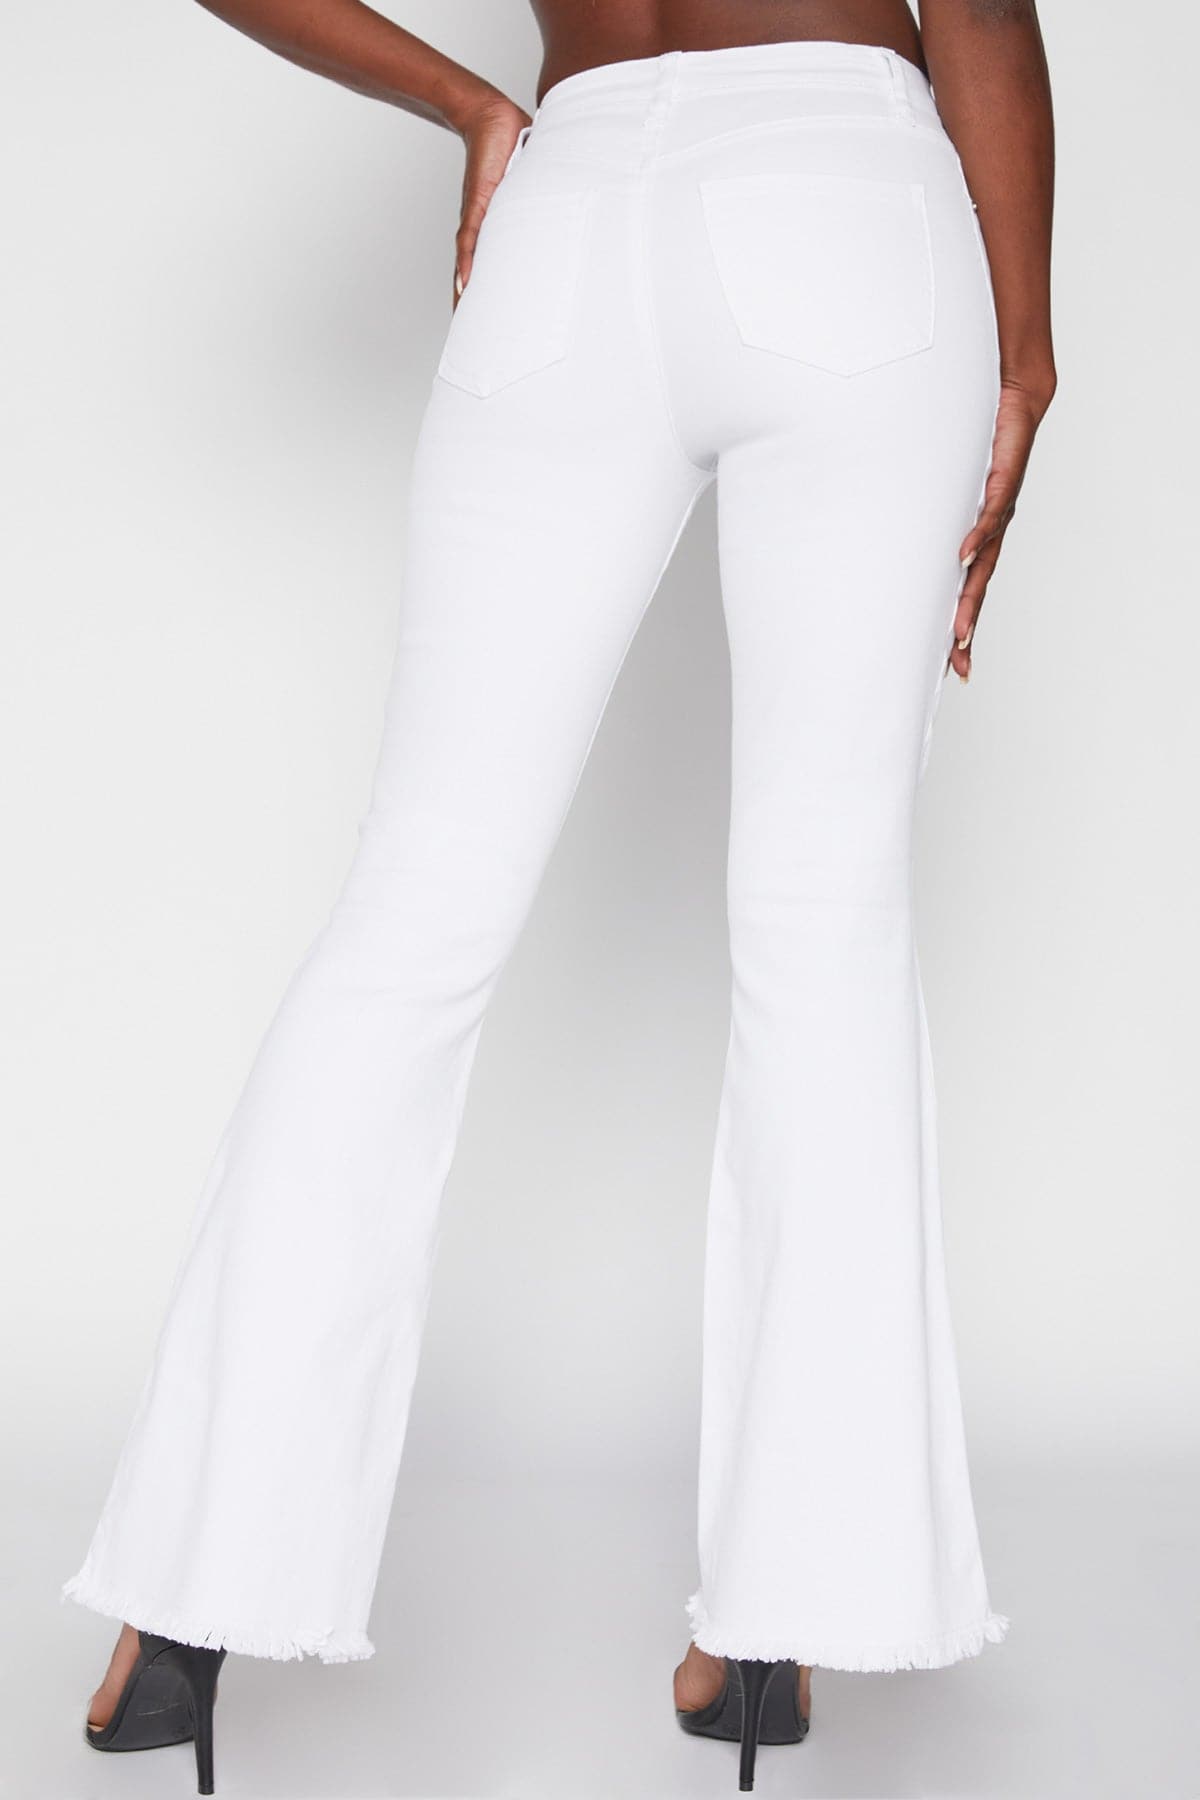 Rise Super Flare Jeans - Regular Inseam from YMI YMI JEANS